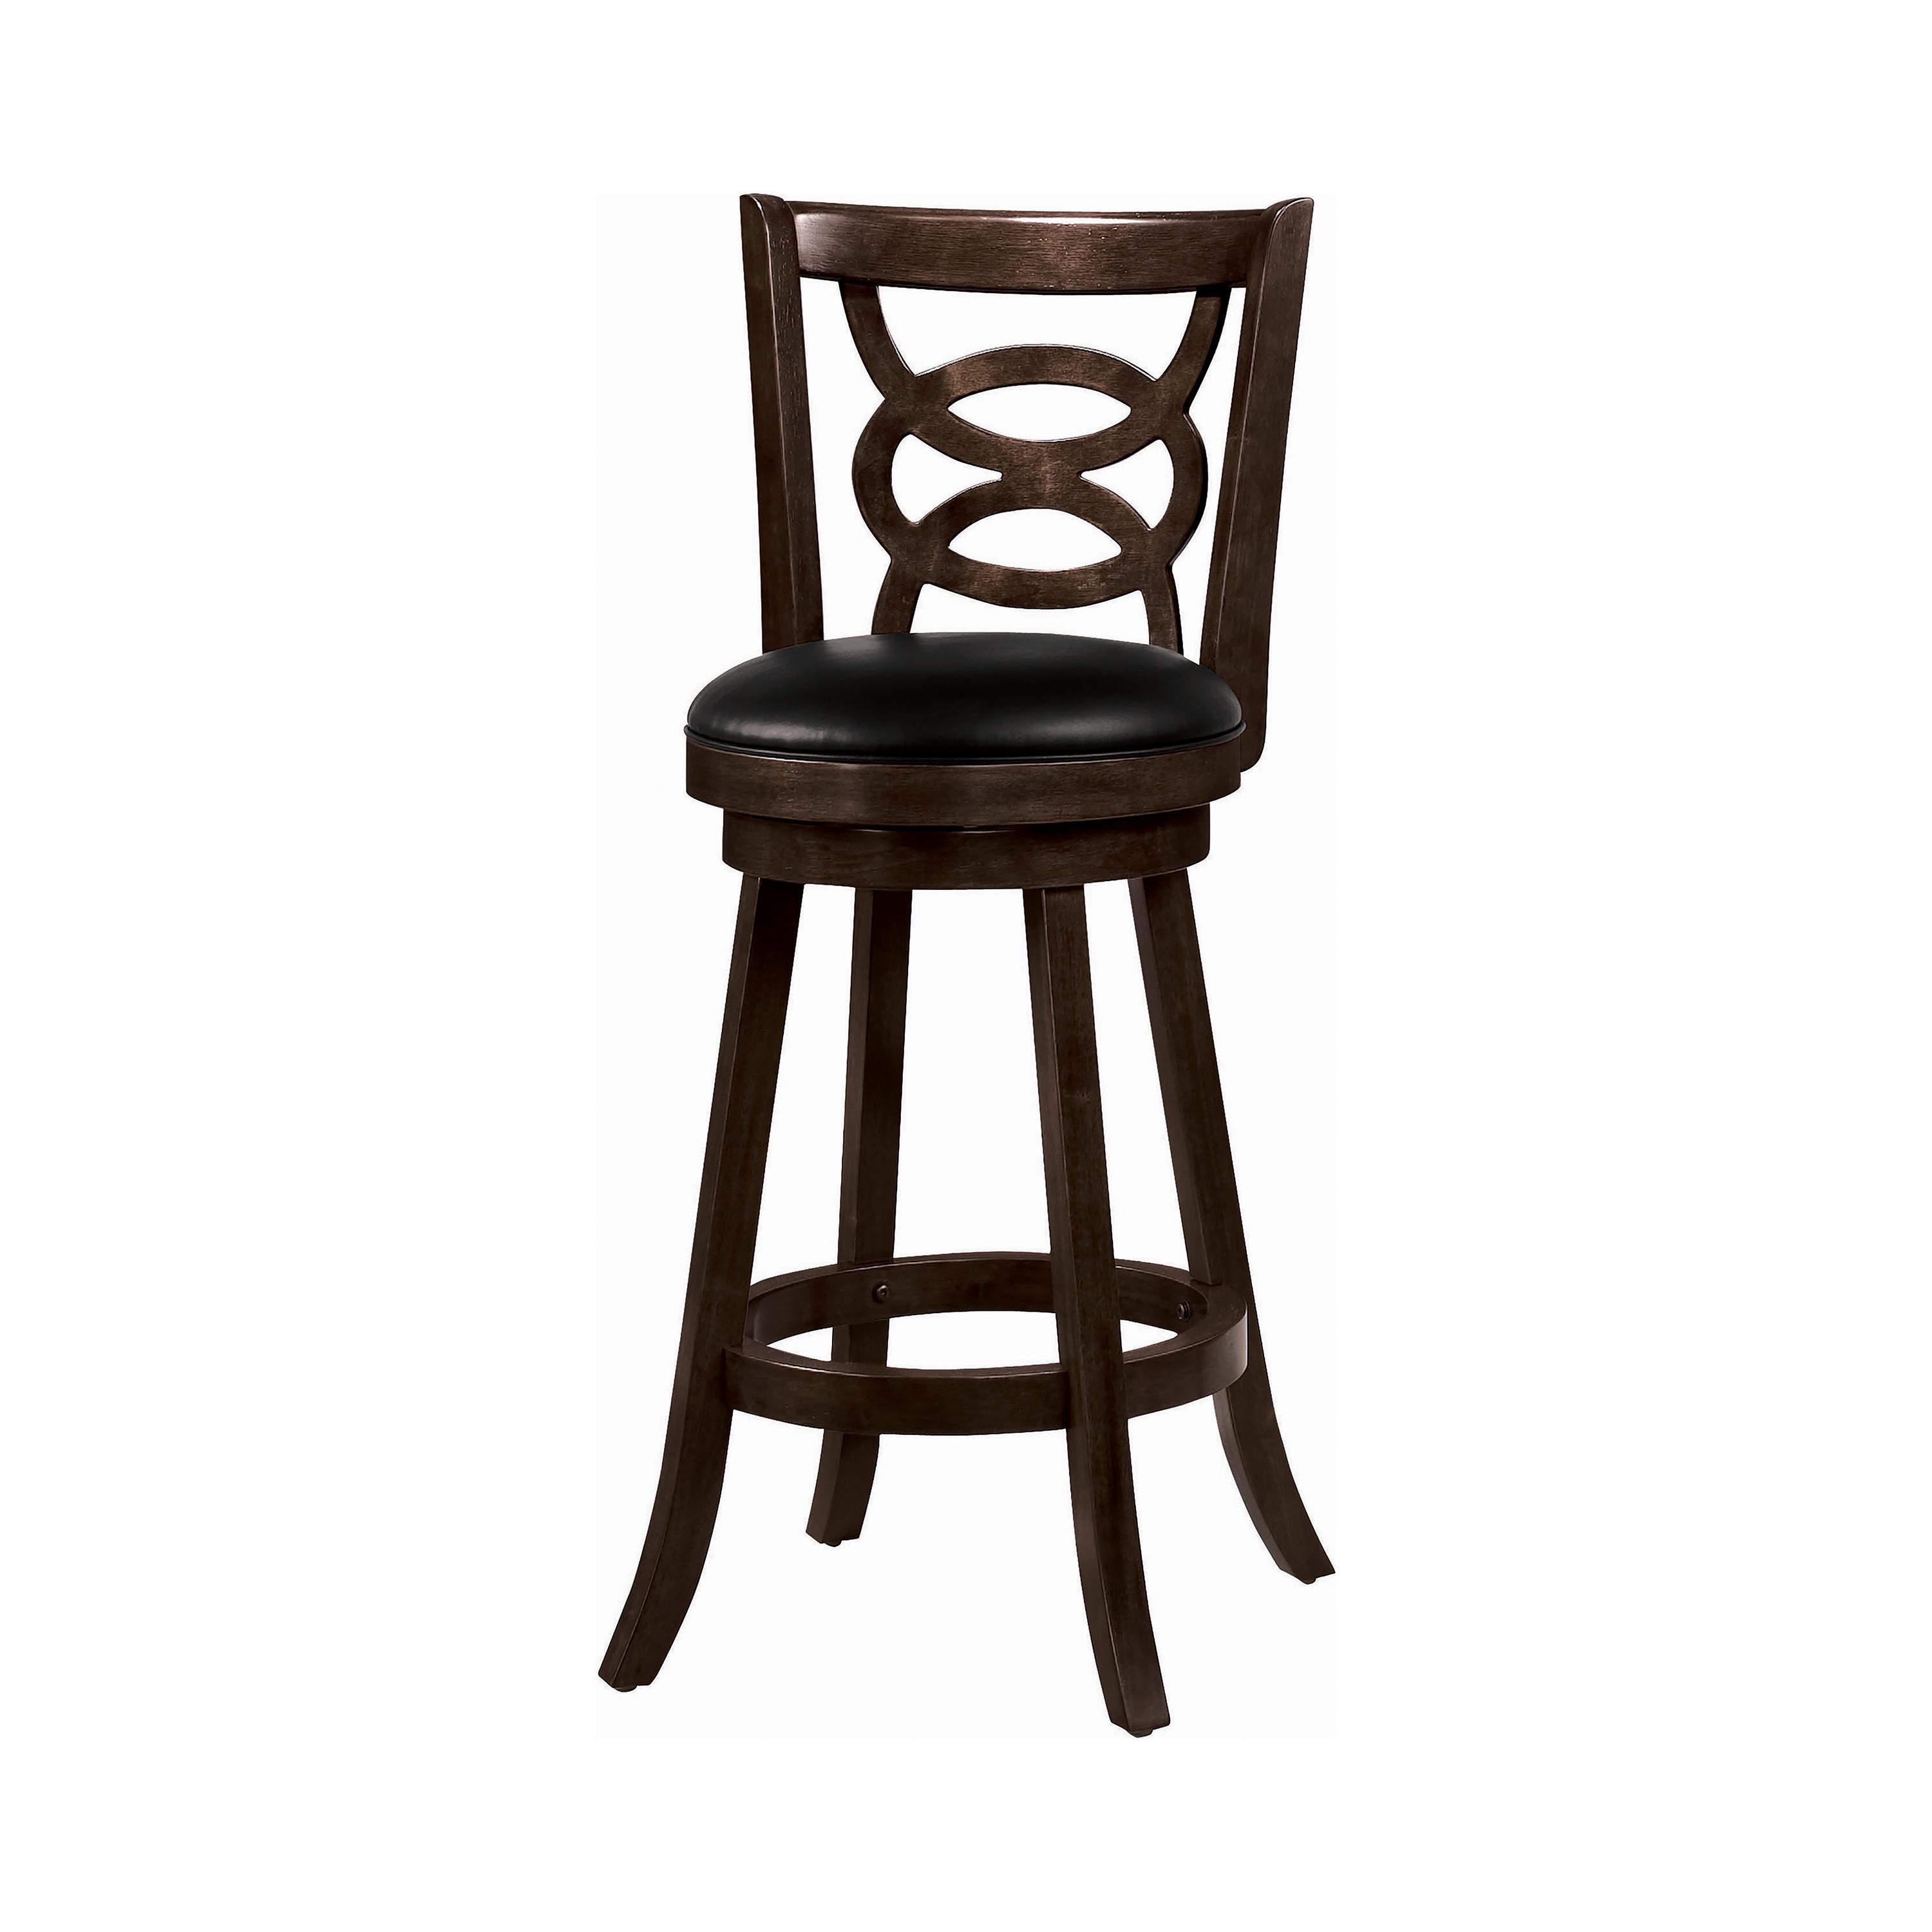 Traditional Bar Stool Set 101930 101930 in Cappuccino, Black Leatherette